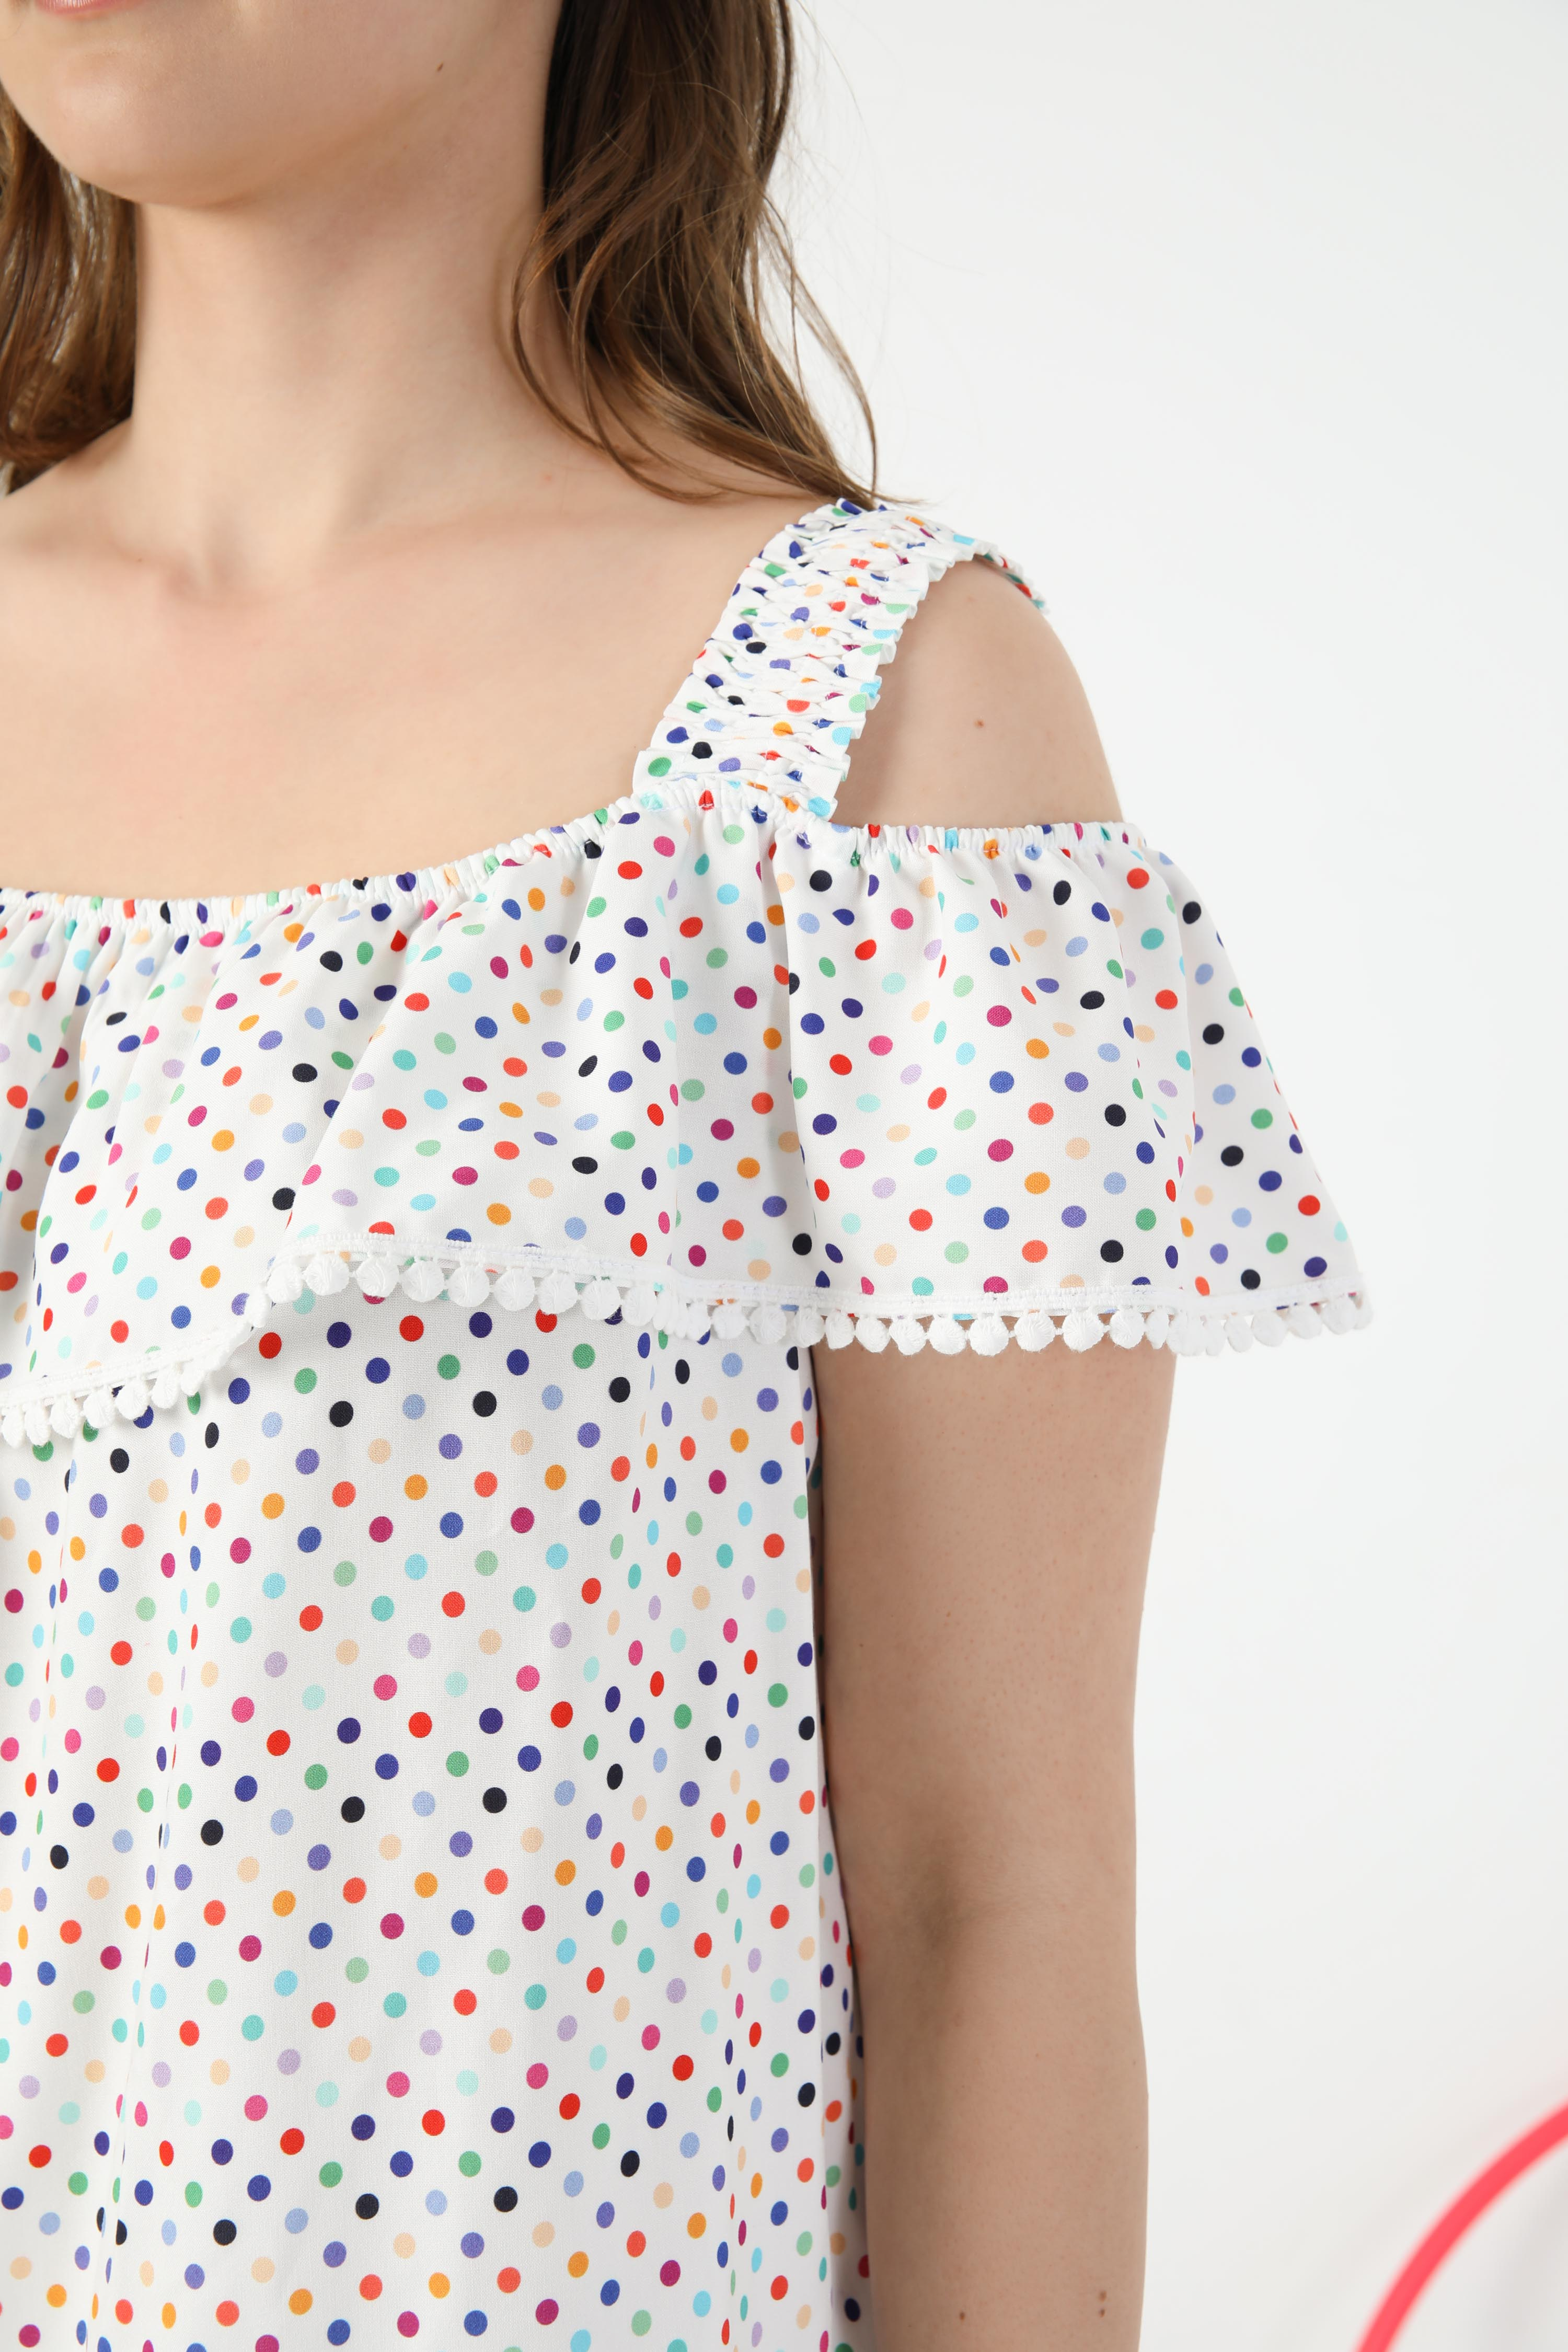 Polka dot print blouse with suspenders (Shipping May 5/10)